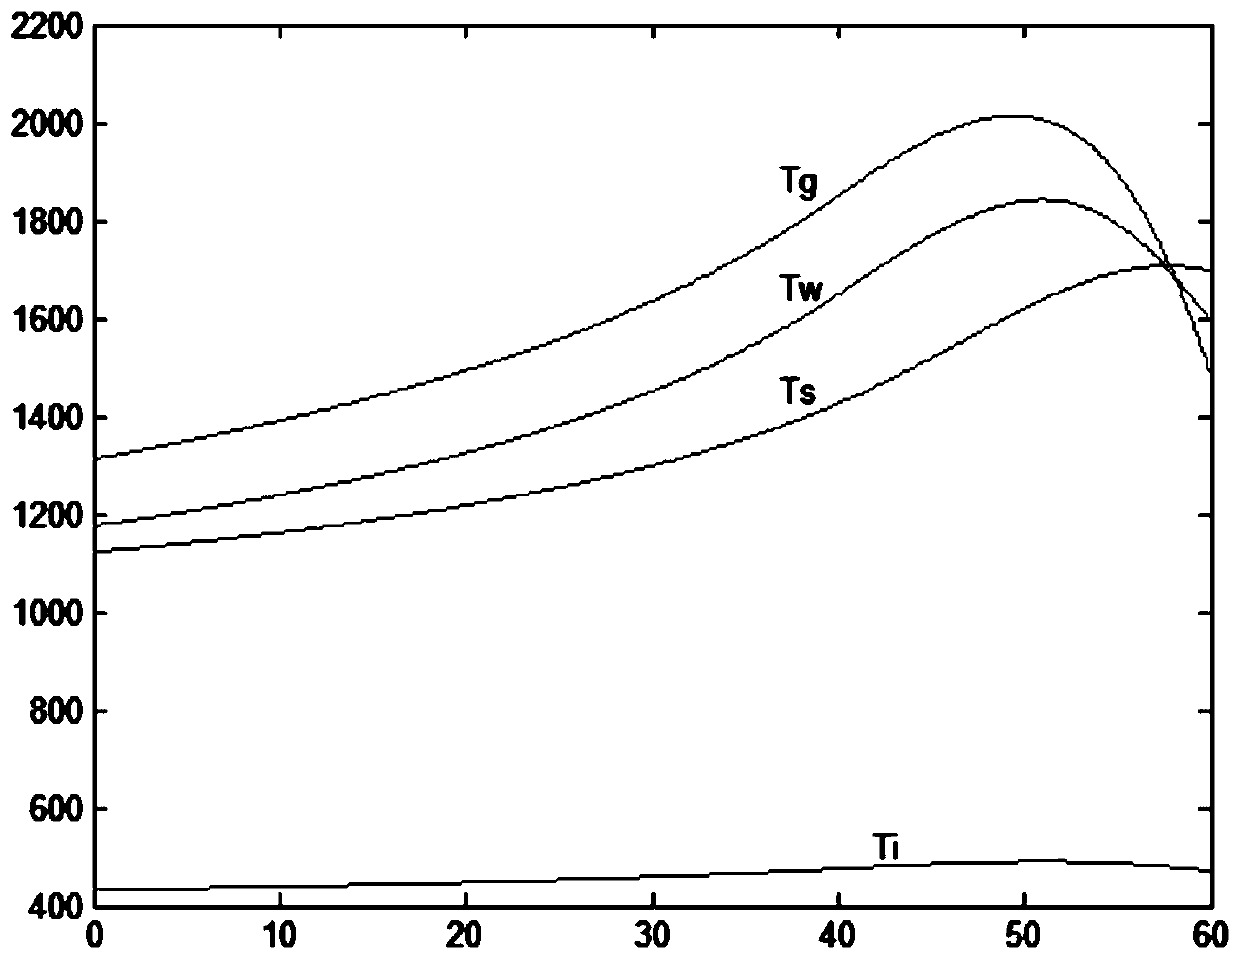 A One-Dimensional Simulation Method for Predicting Clinker Quality in Cement Rotary Kiln